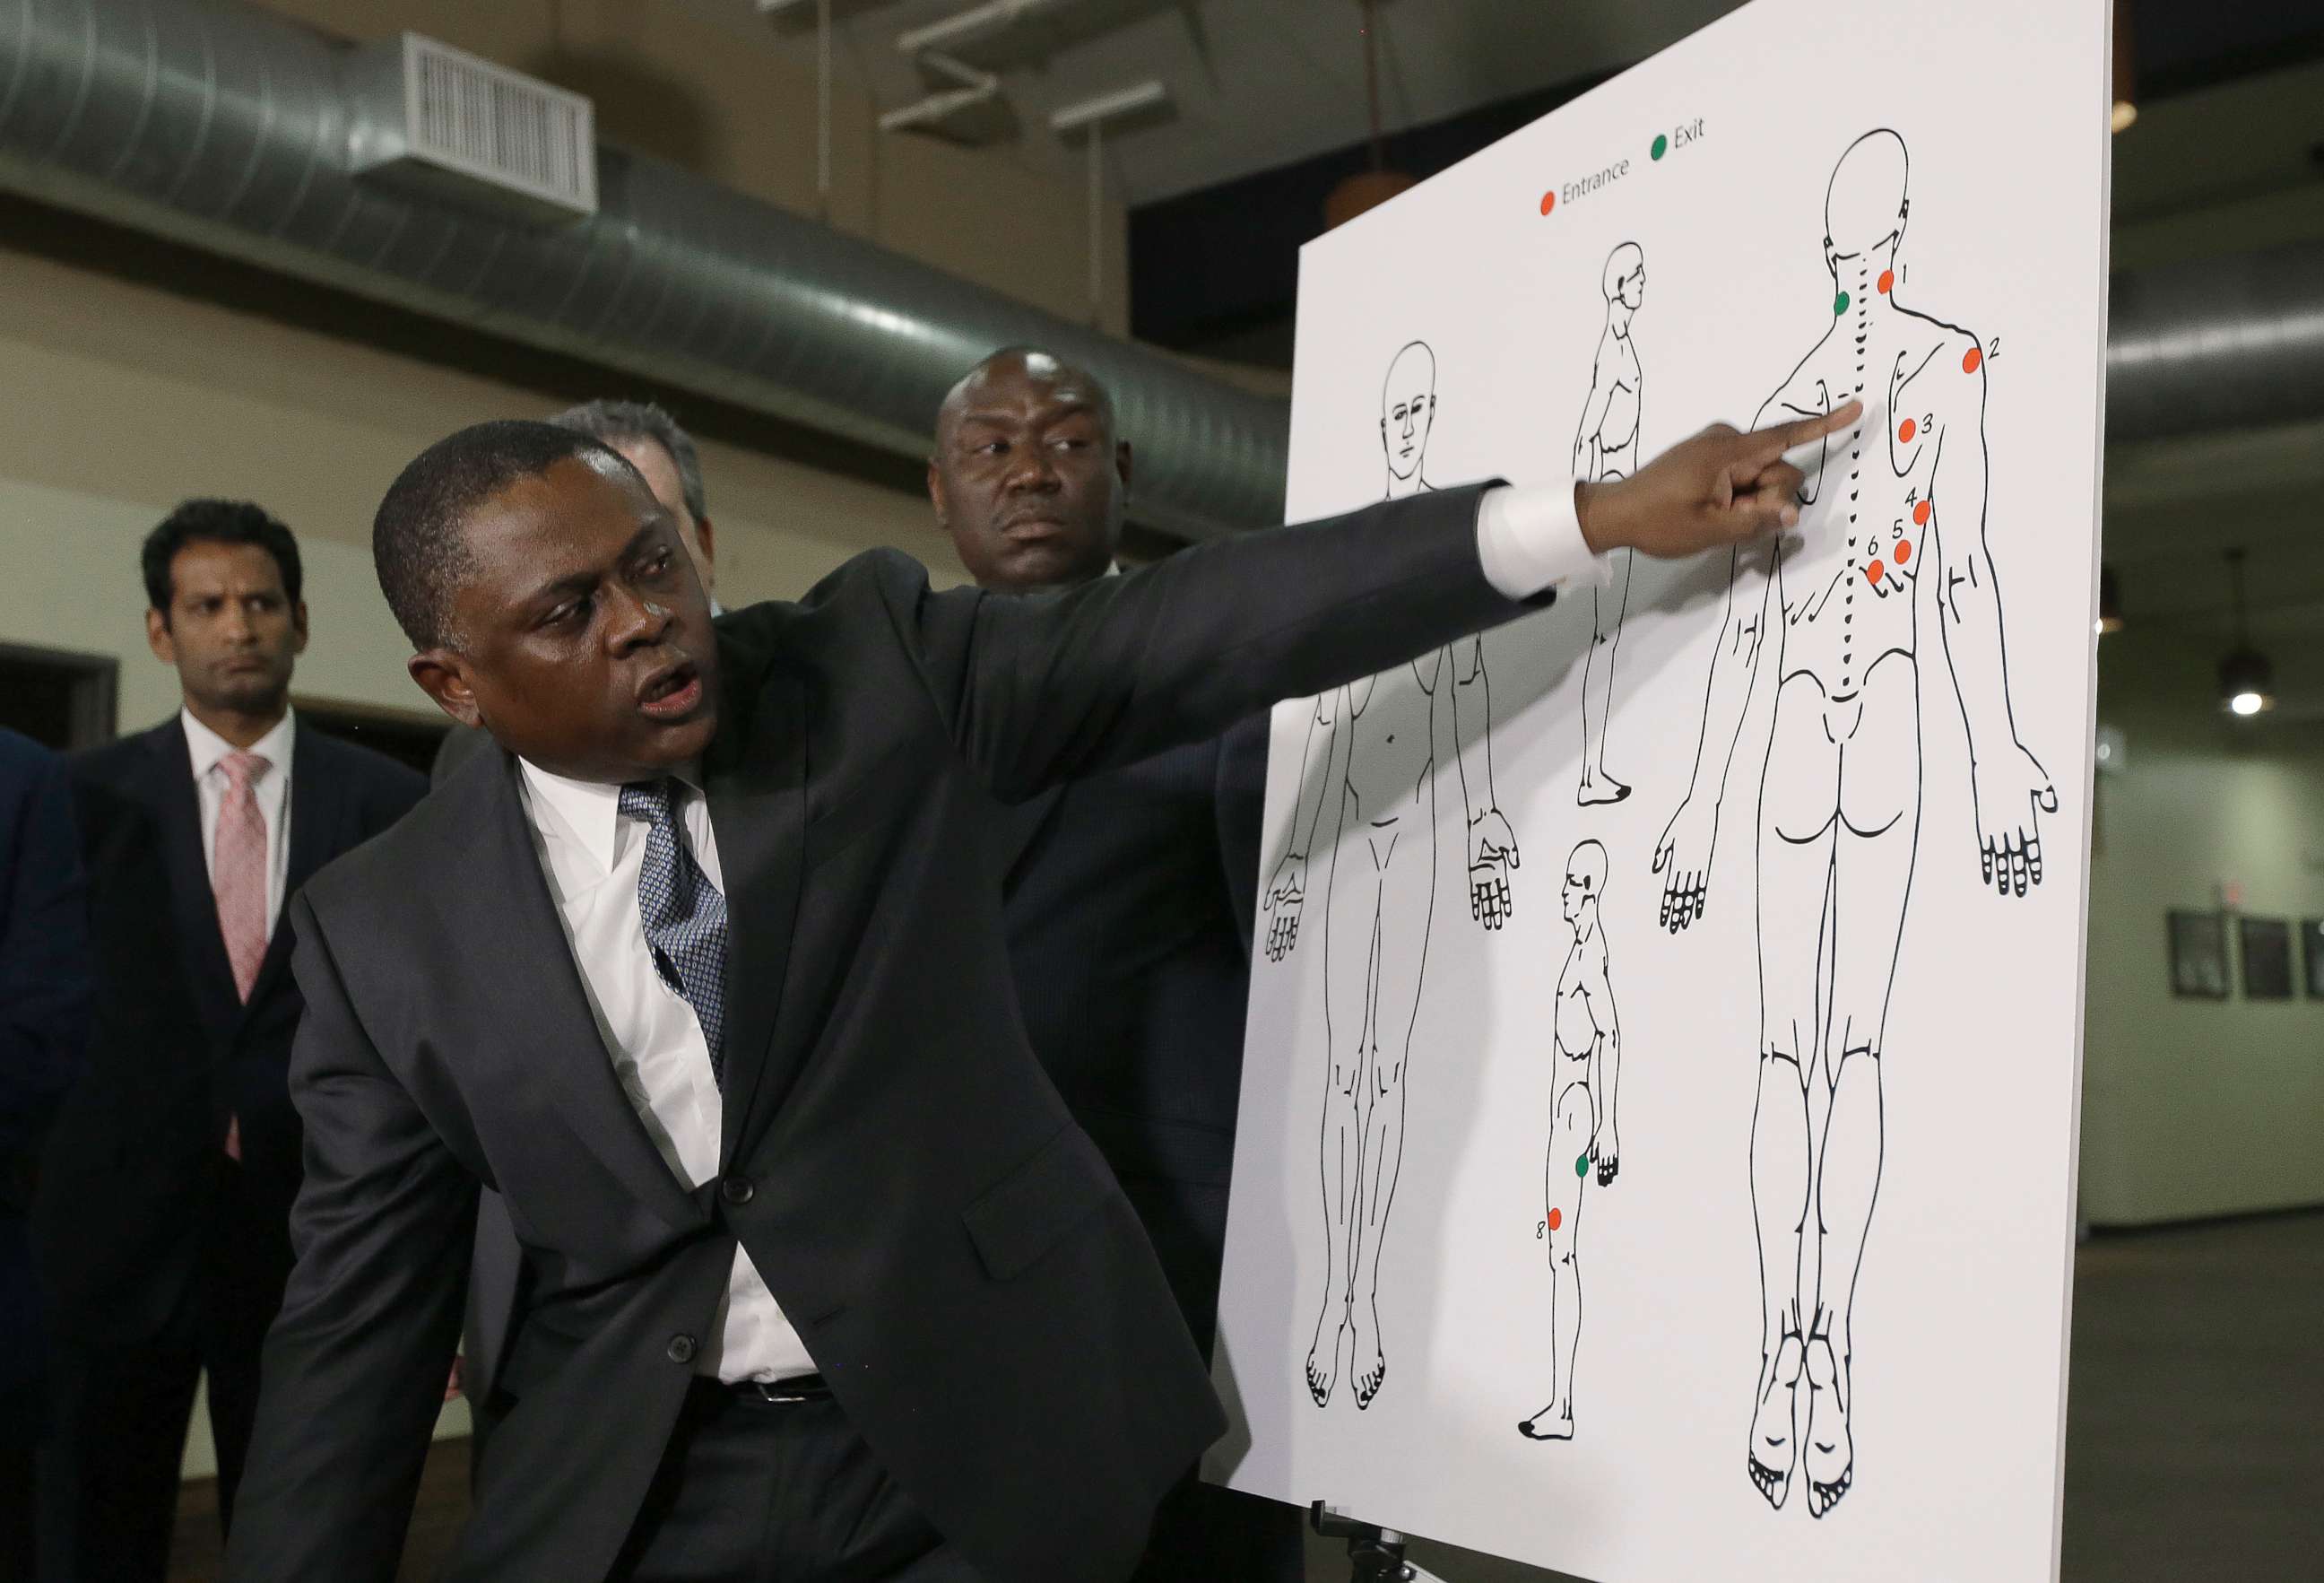 PHOTO: Pathologist, Dr. Bennet Omalu, gestures to a diagram showing the gun shot wounds he found on the body of police shooting victim Stephon Clark, during a news conference, March 30, 2018, in Sacramento, Calif.